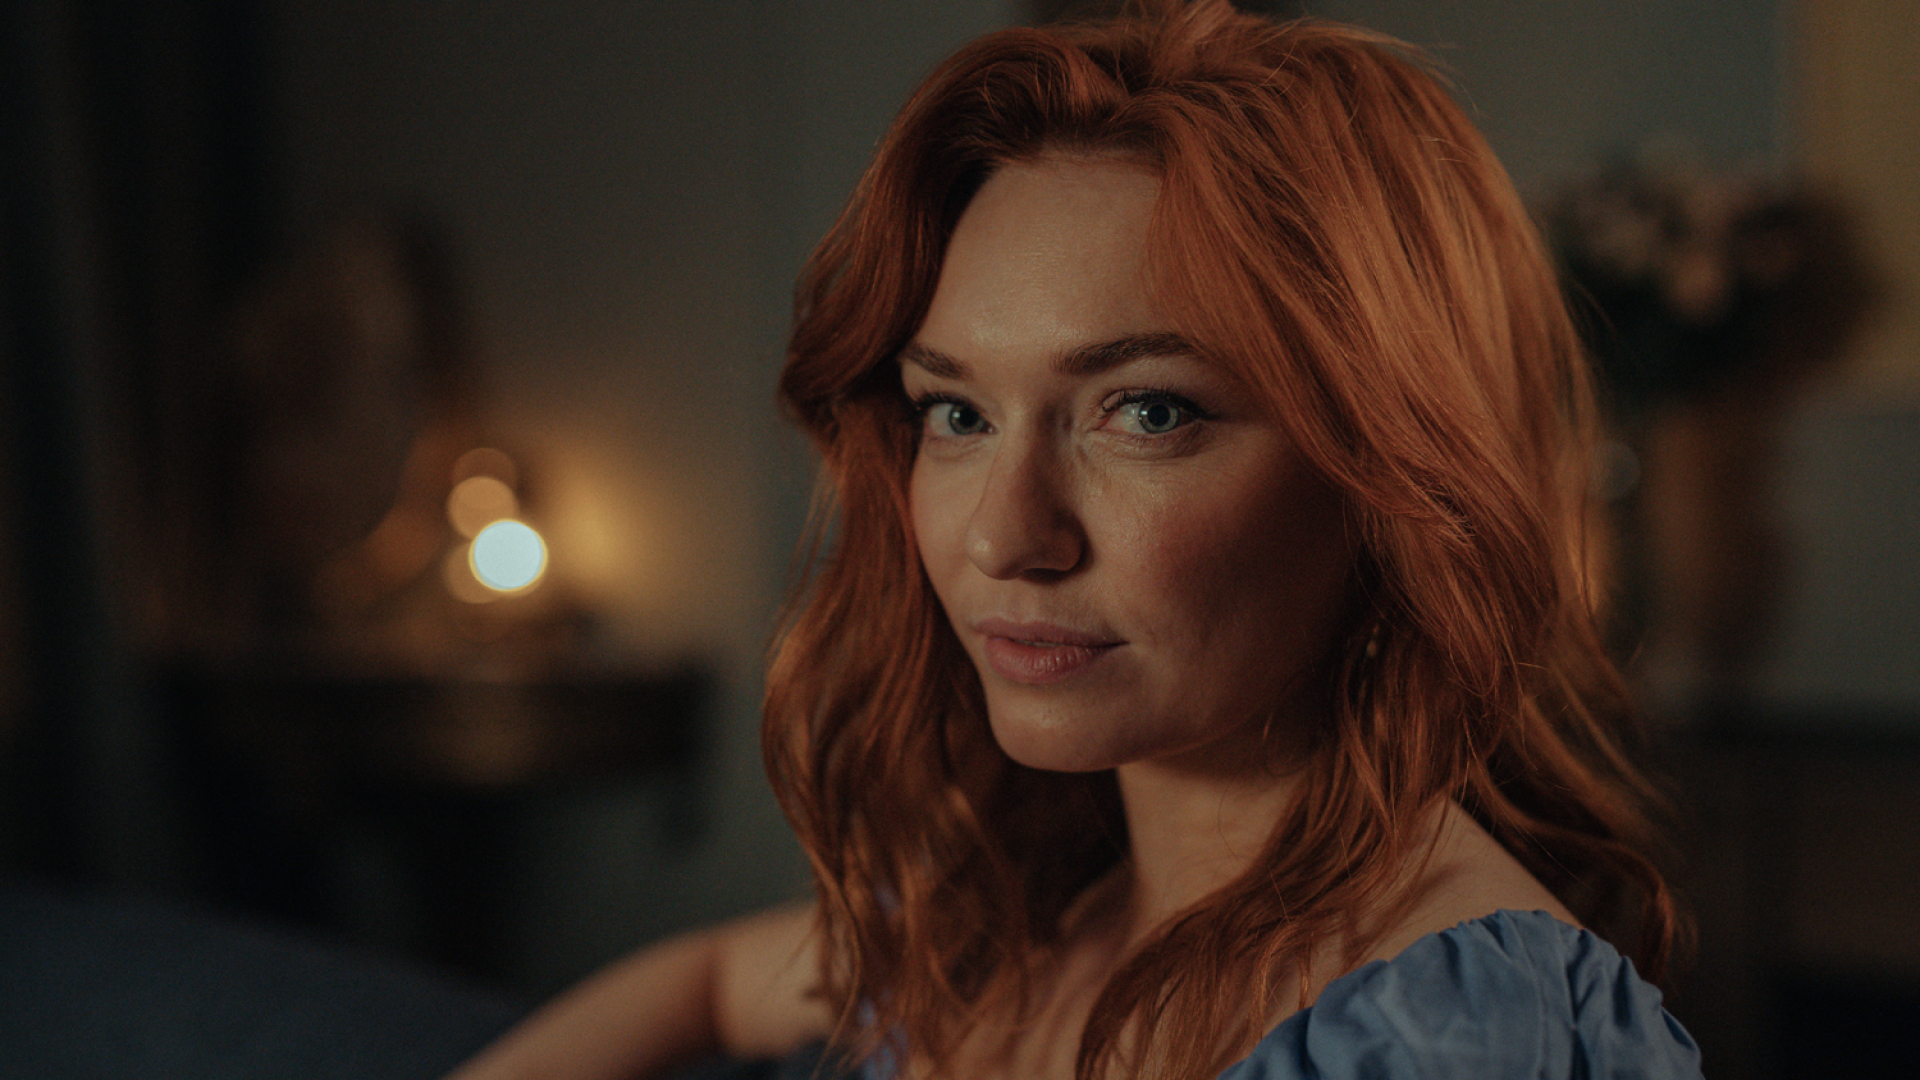 The Couple Next Door: Eleanor Tomlinson reveals all about the “sexy and addictive” new drama